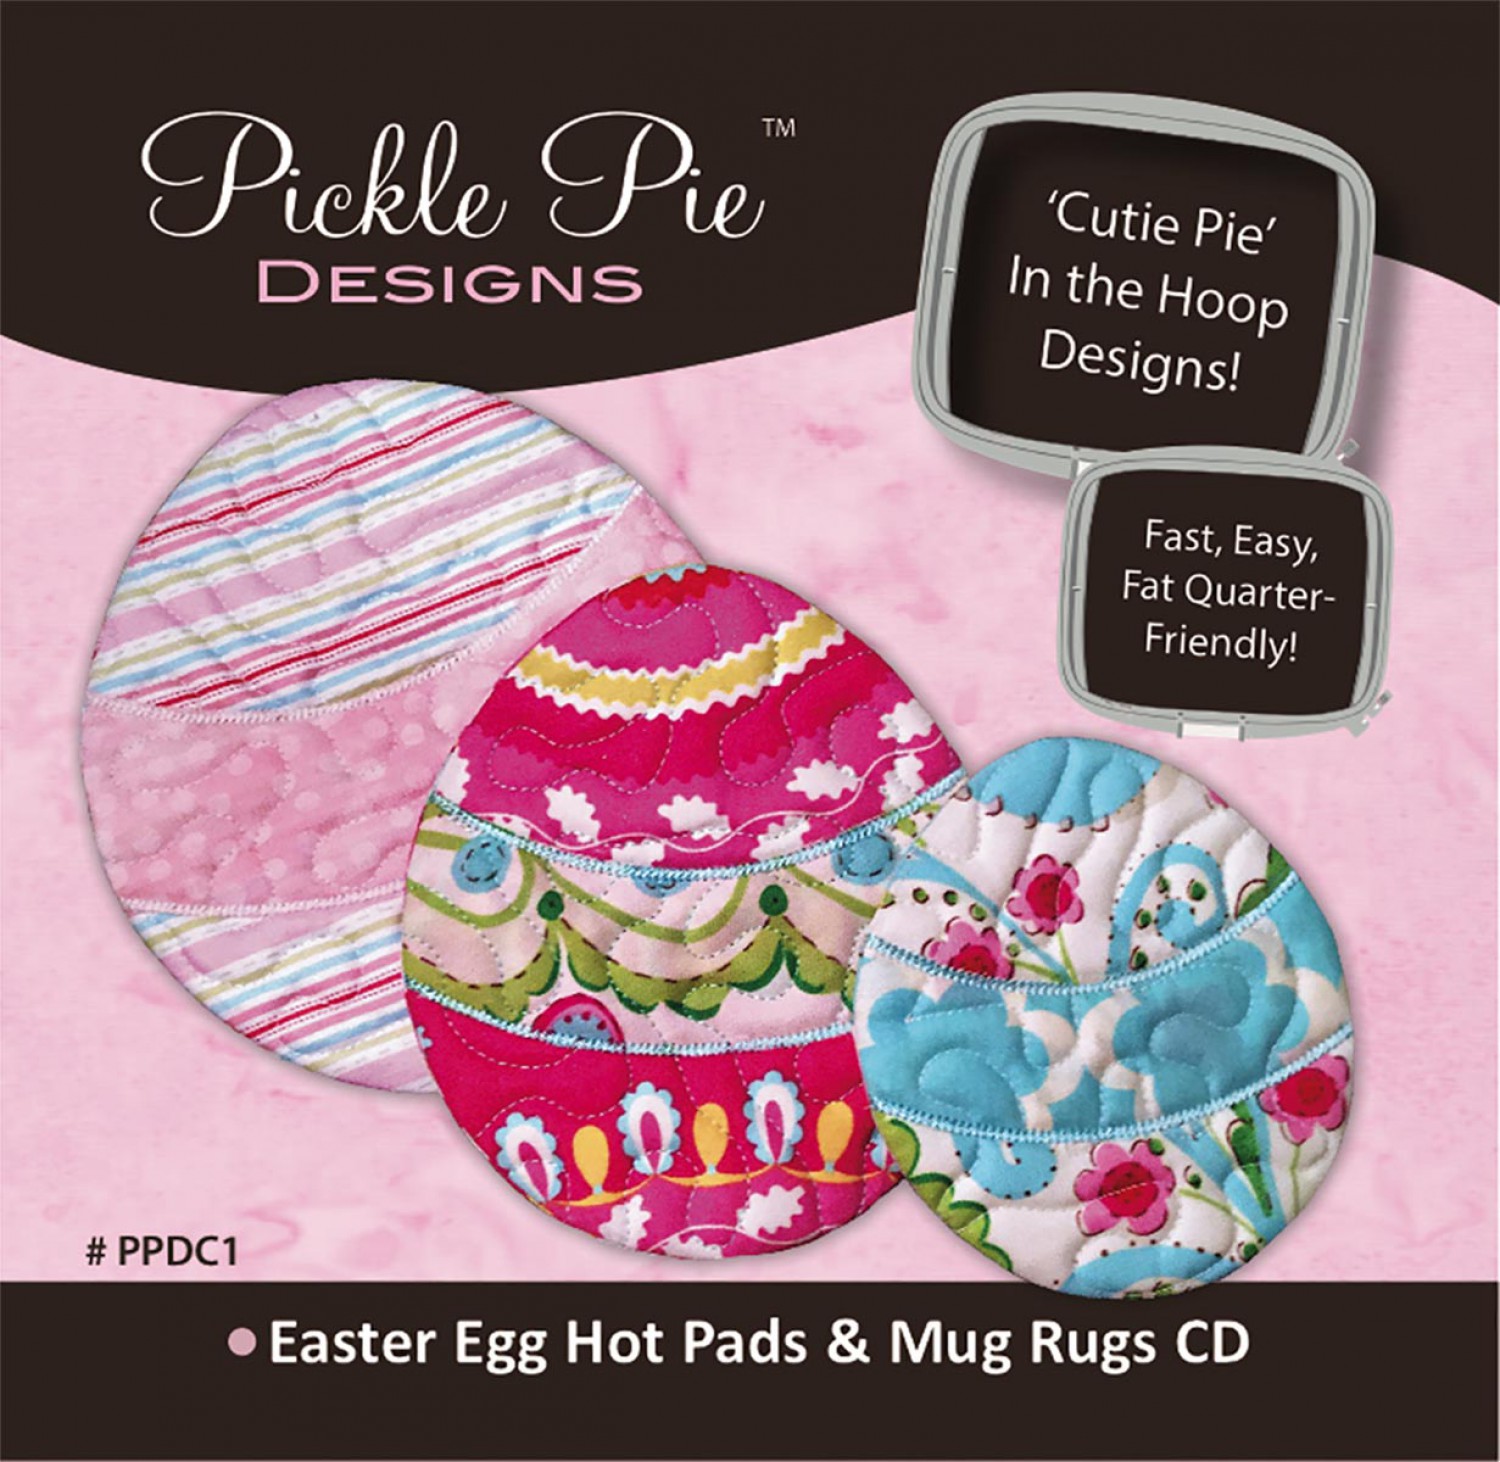 Easter Egg Hot Pads & Mug Rugs Collection Embroidery Designs on CD-ROM by Pickle Pie Designs